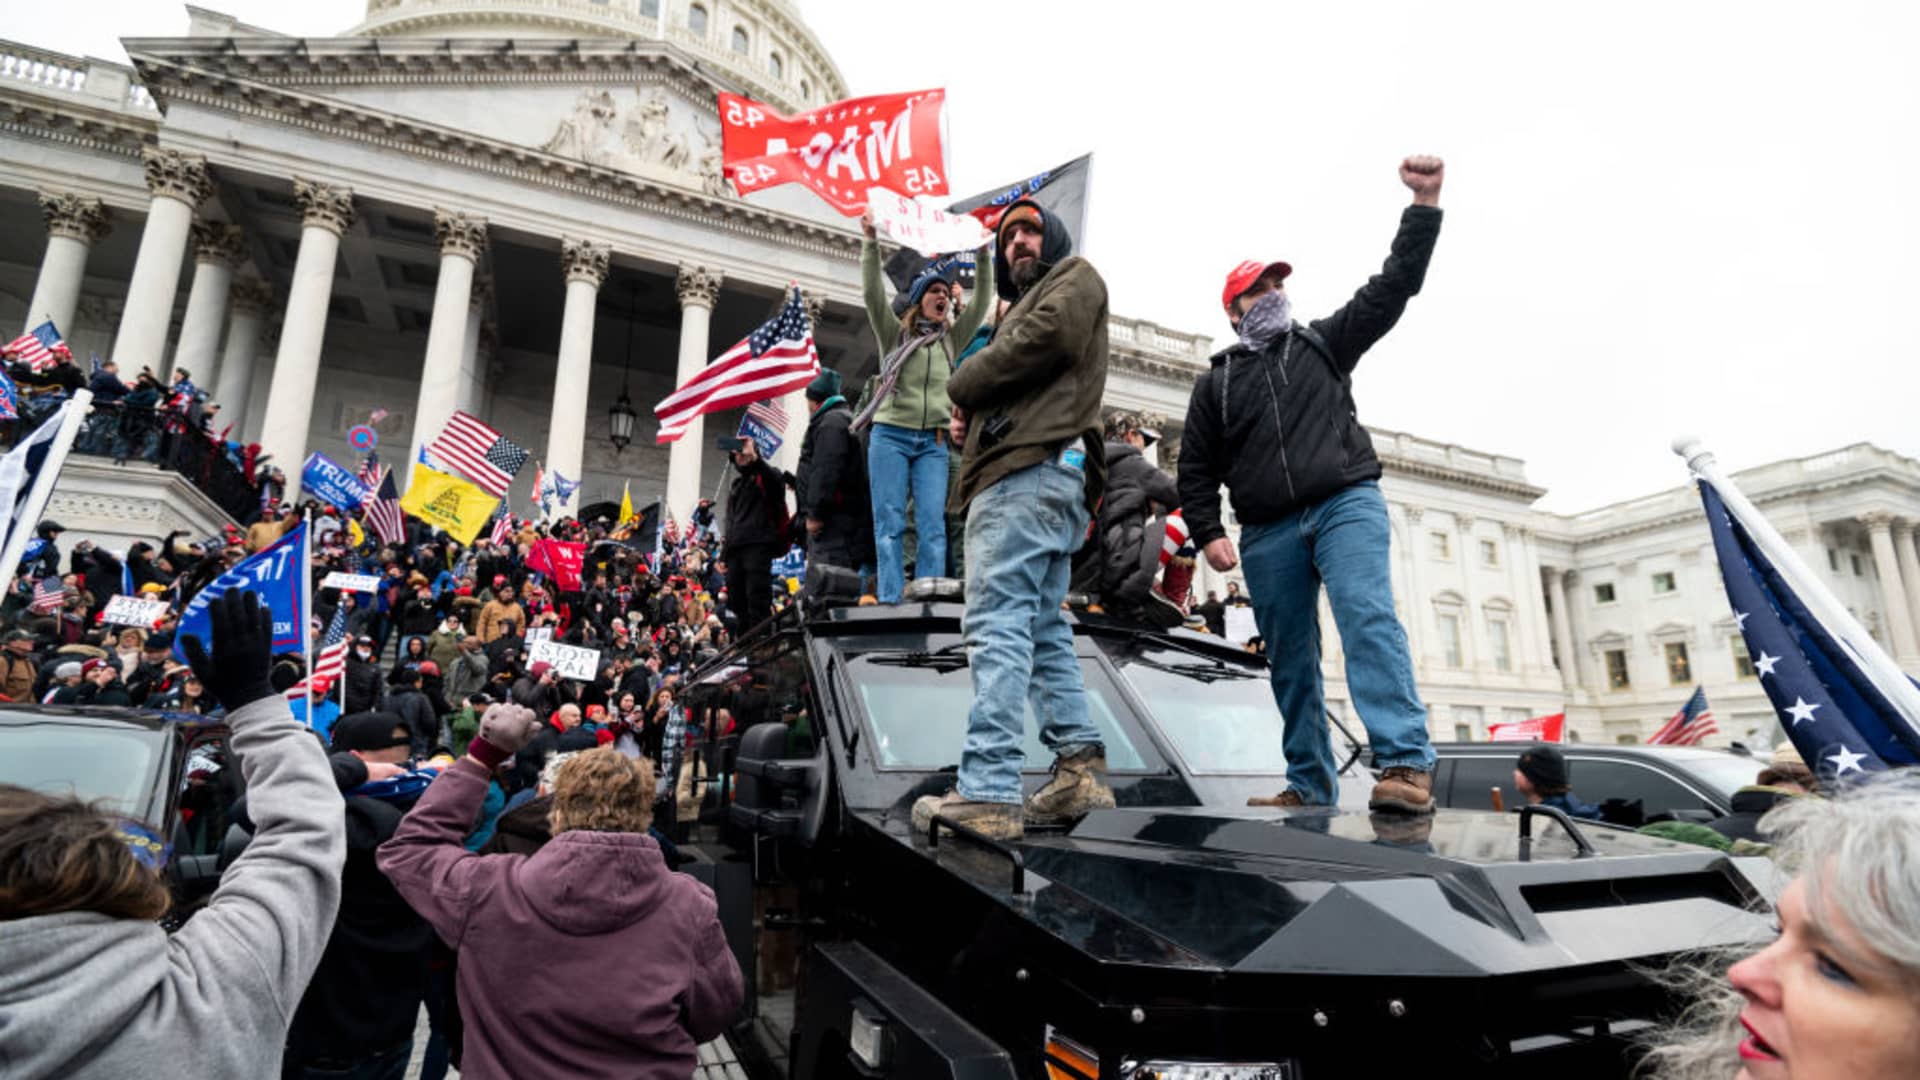 Trump supporters stand on the U.S. Capitol Police armored vehicle as others take over the steps of the Capitol on Wednesday, Jan. 6, 2021, as the Congress works to certify the electoral college votes.